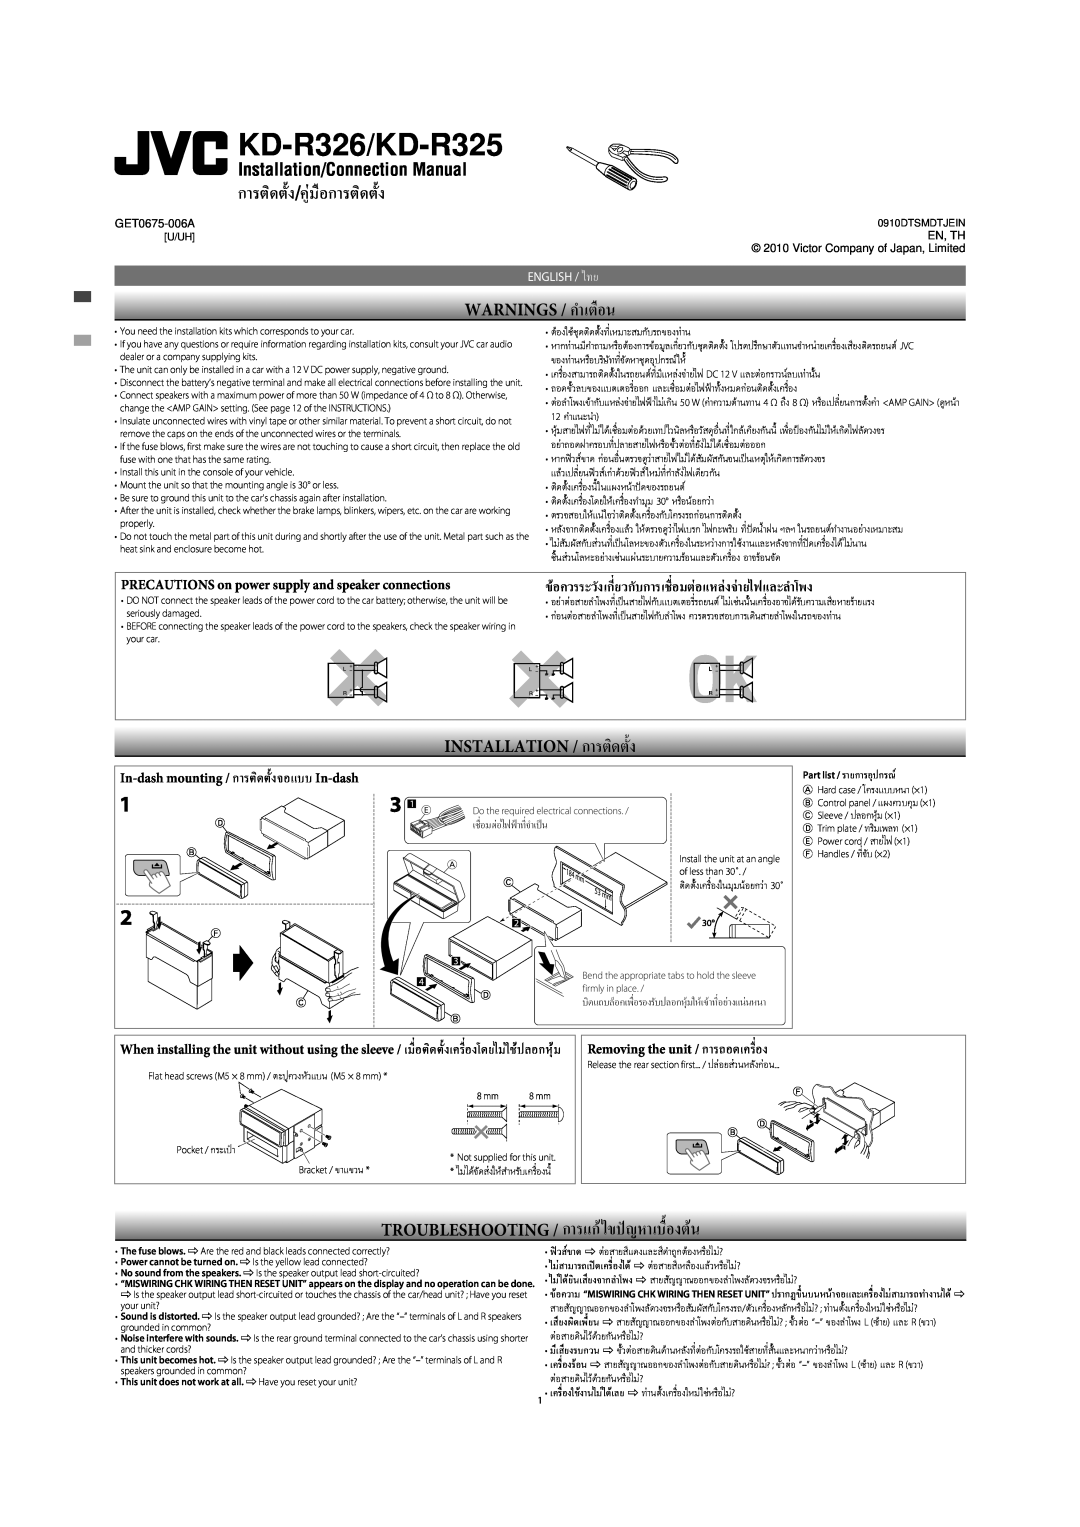 JVC KD-R325, KD-R326 Warnings / คำเตือน, Installation / การติดตั้ง, PRECAUTIONS on power supply and speaker connections 